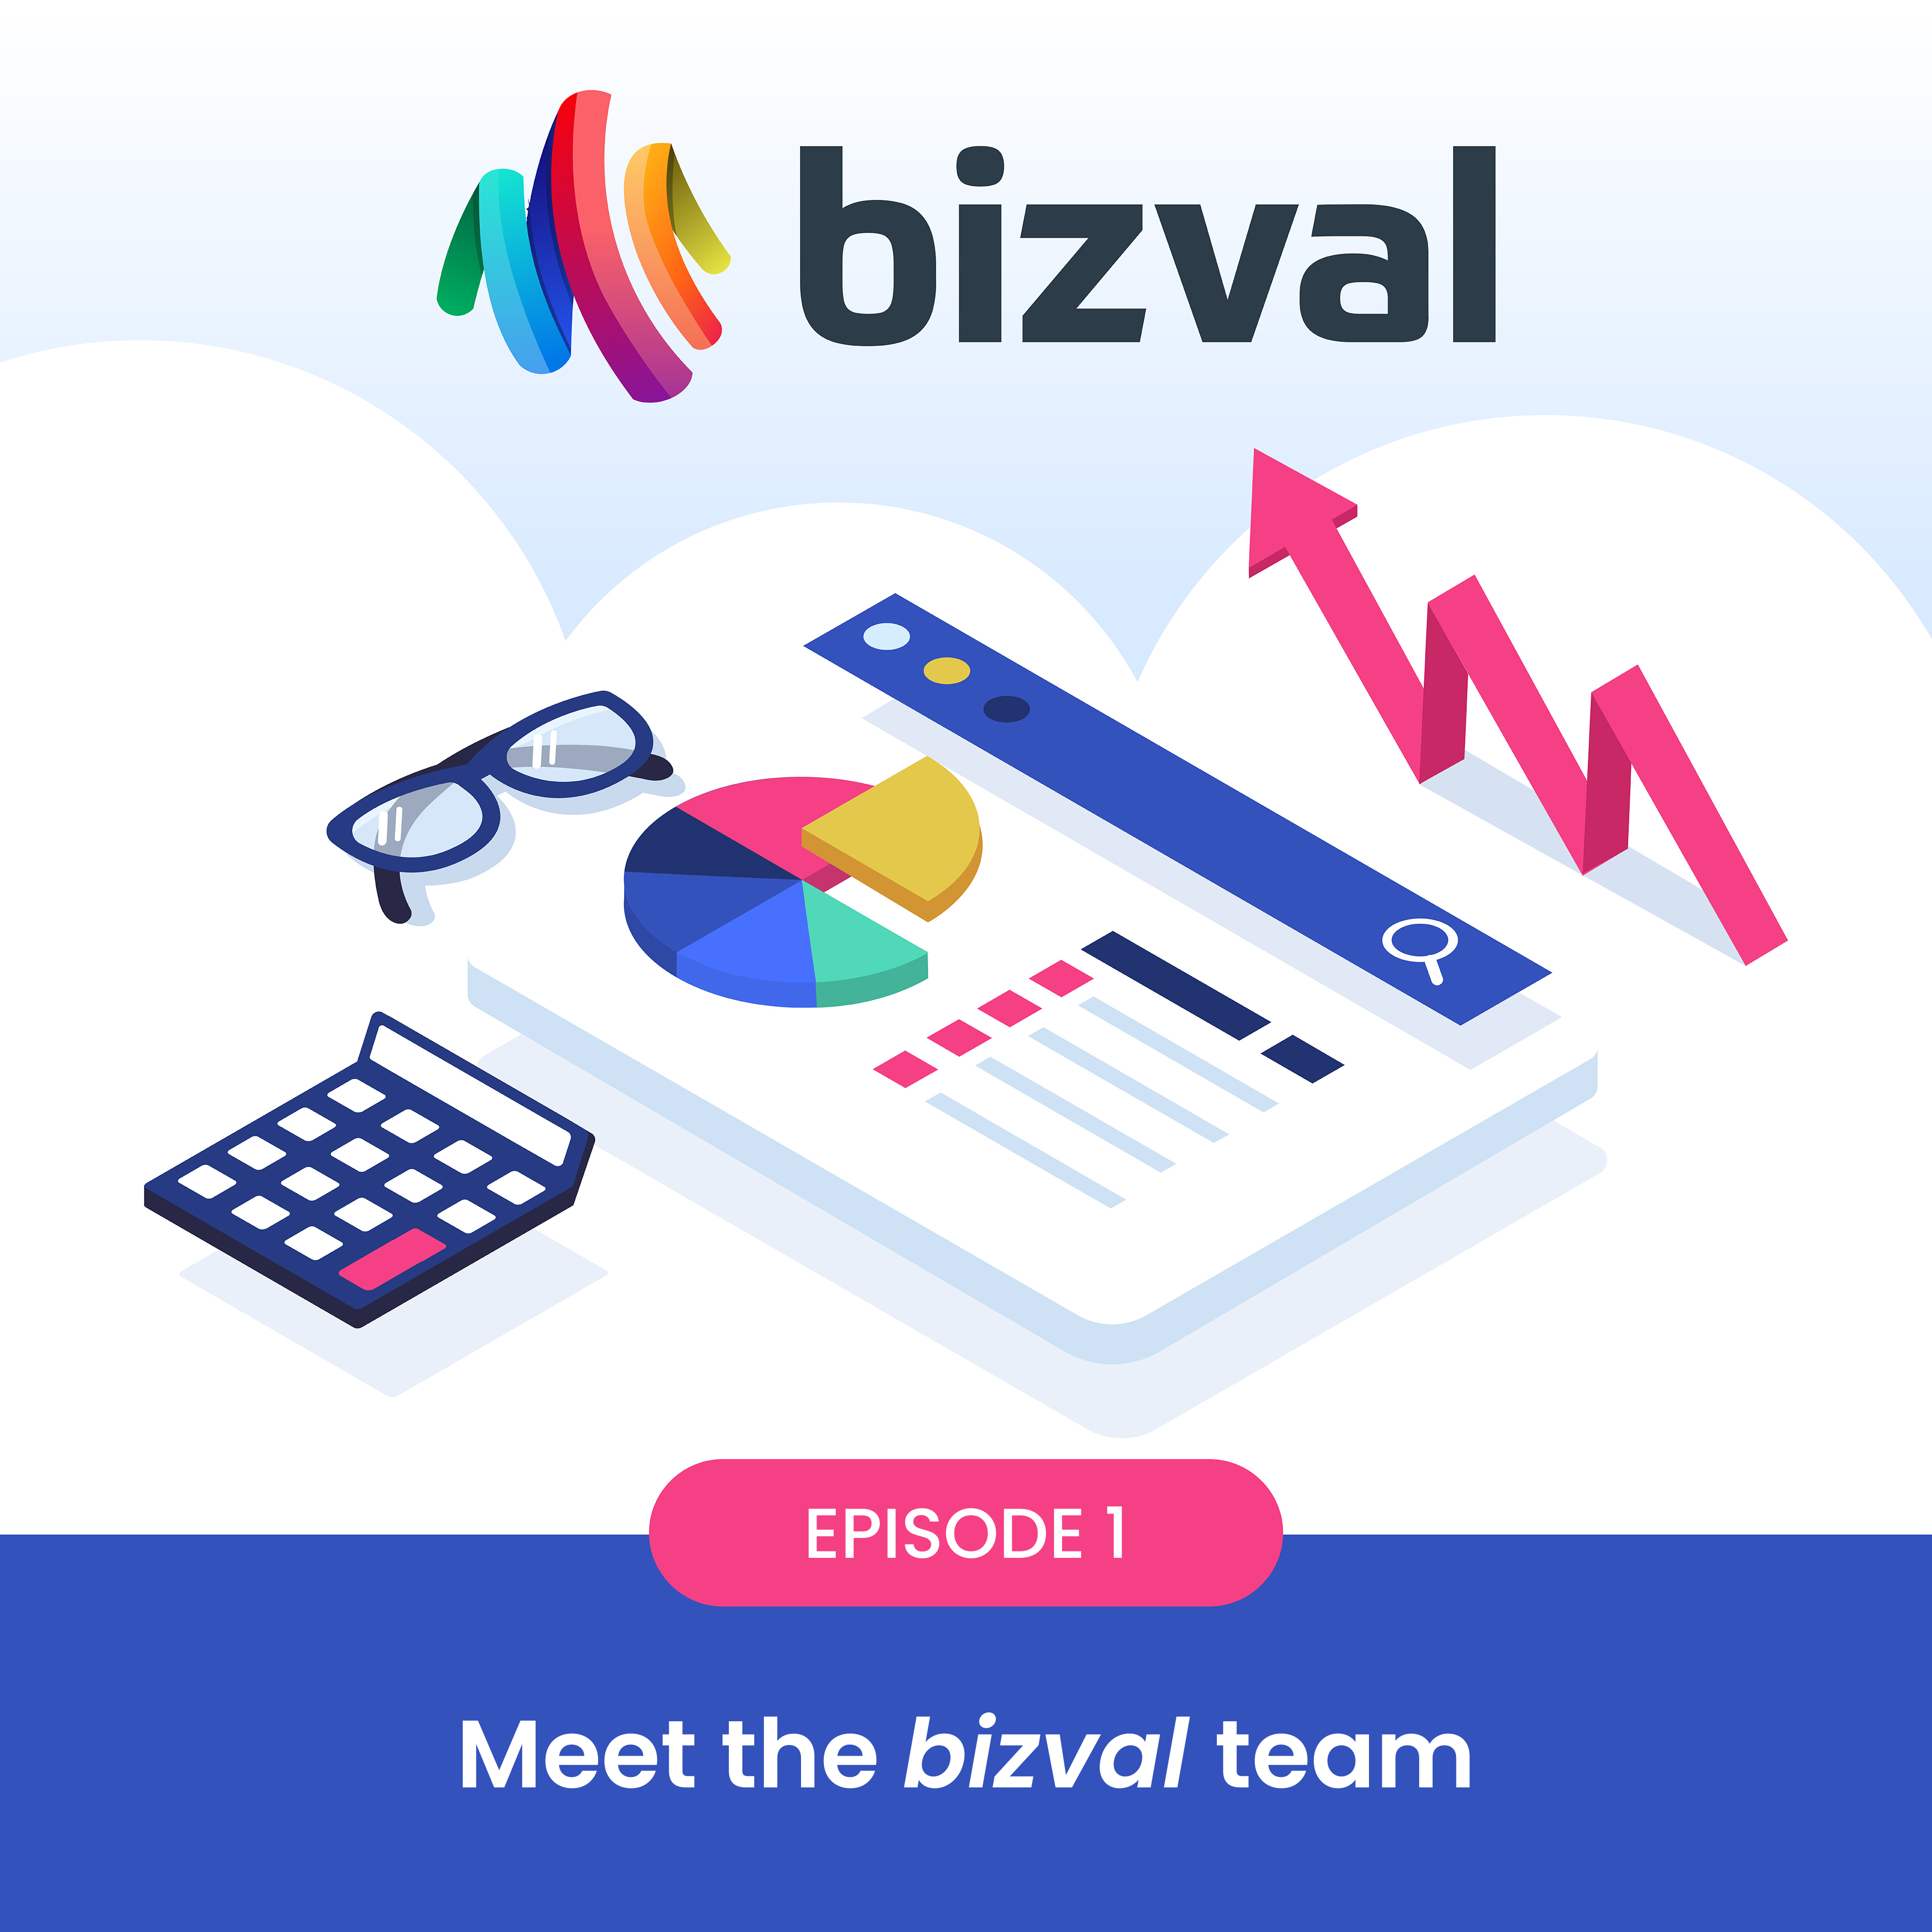 We value your company #1: Meet the bizval team